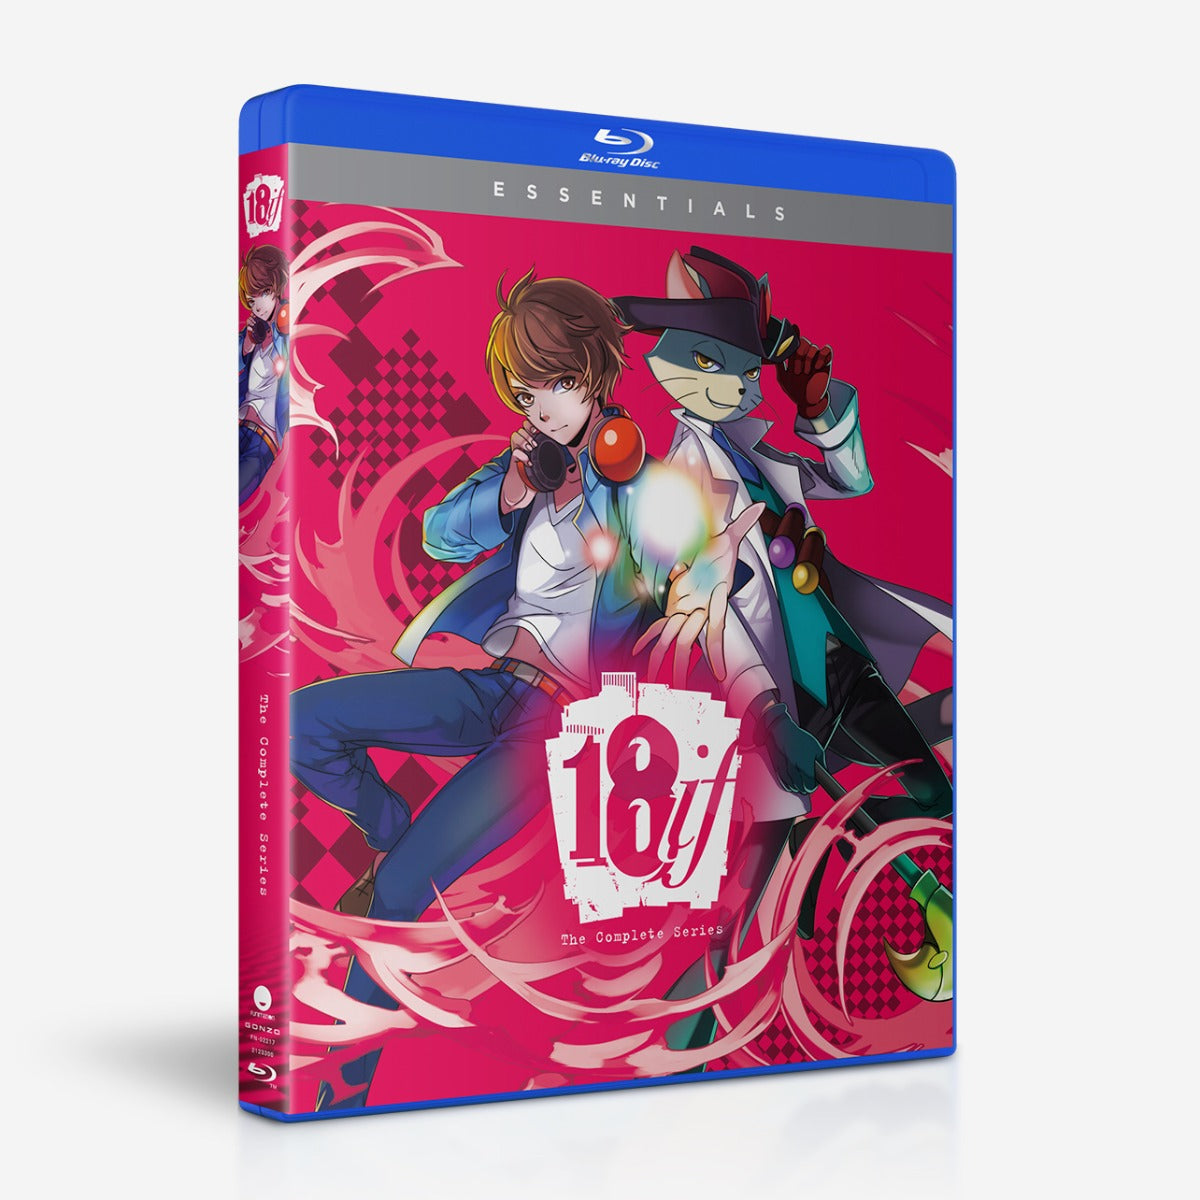 18if - The Complete Series - Essentials - Blu-ray image count 0